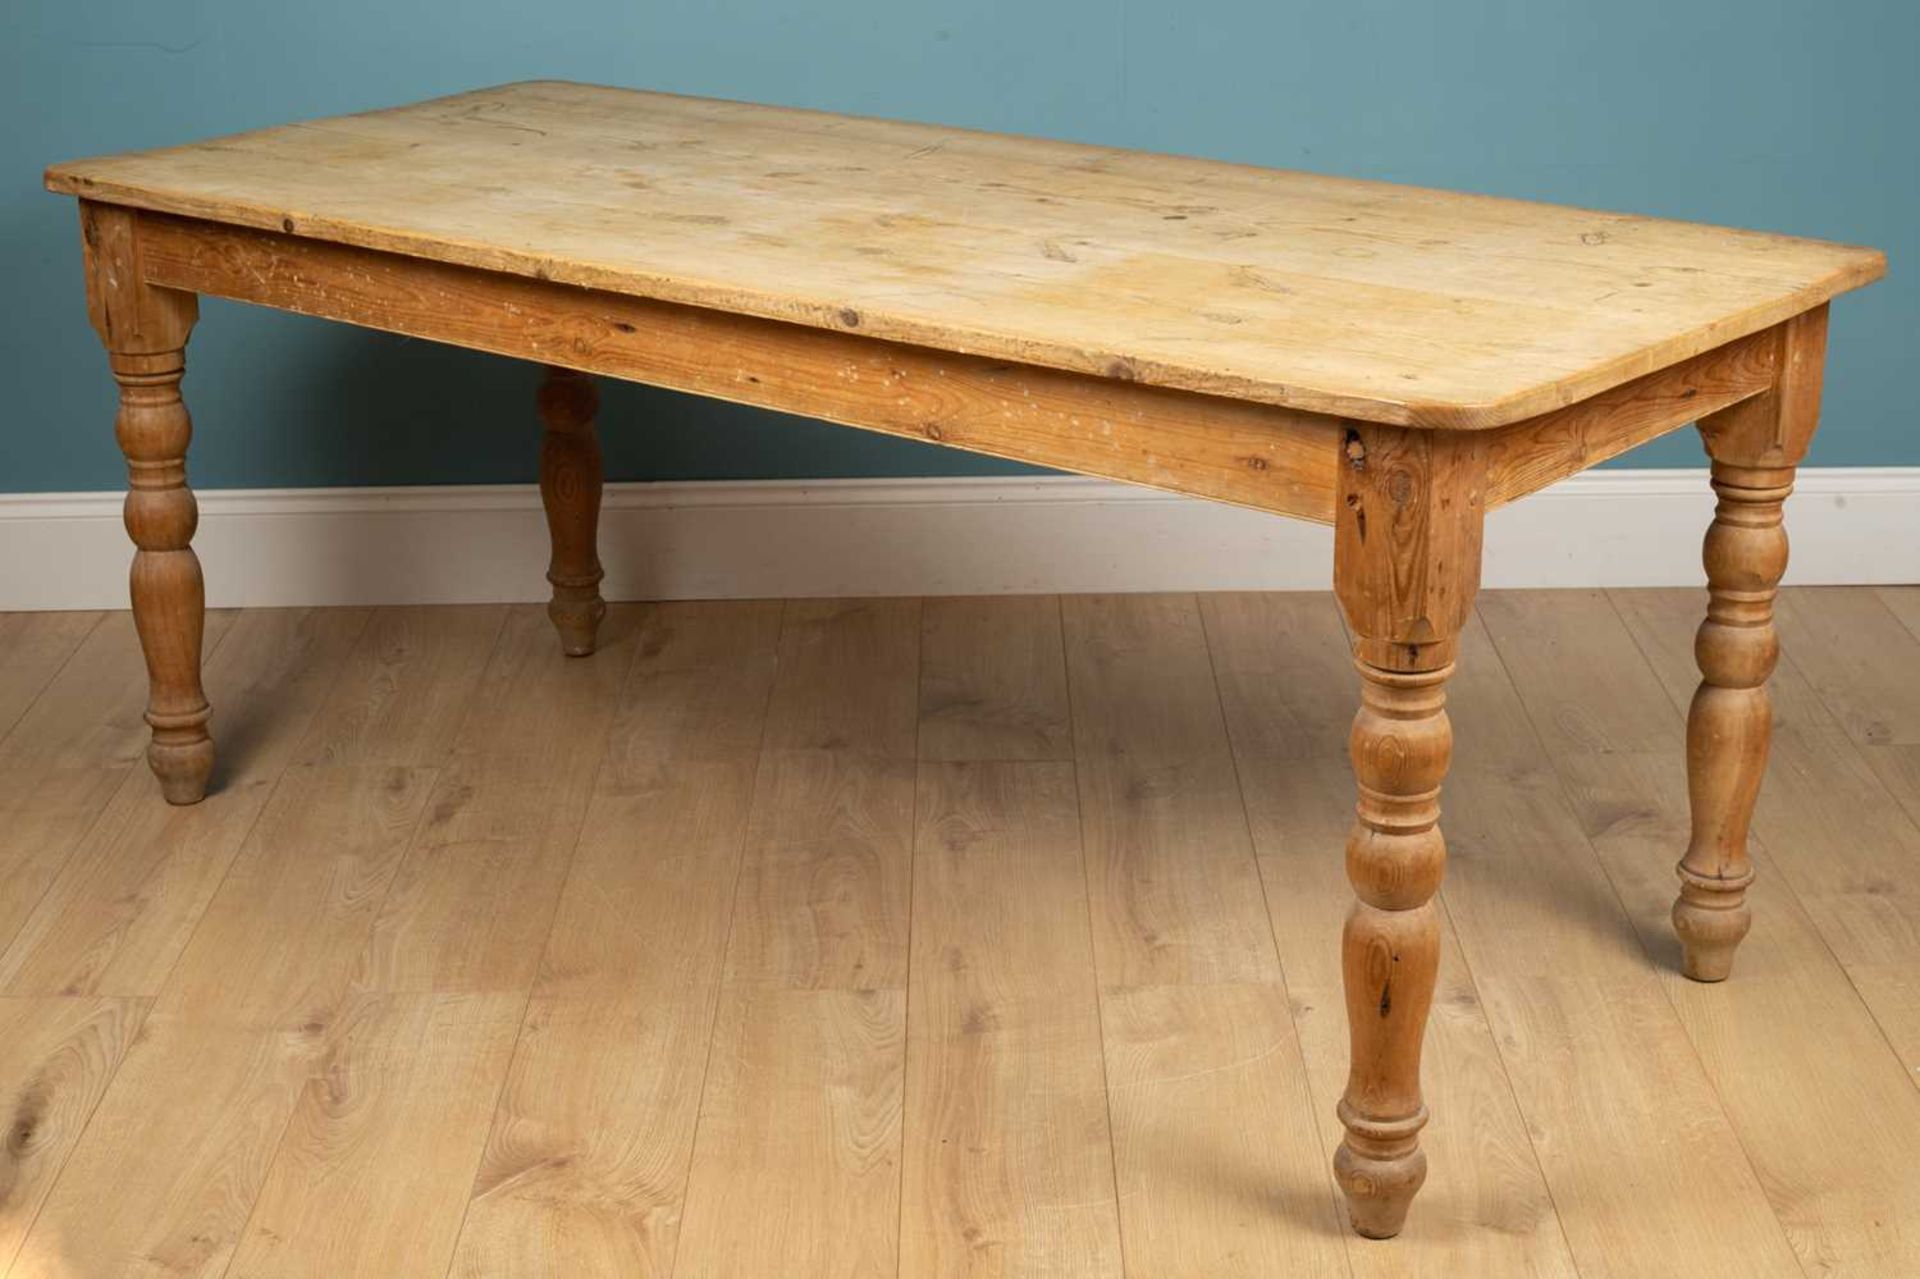 A large pine kitchen table